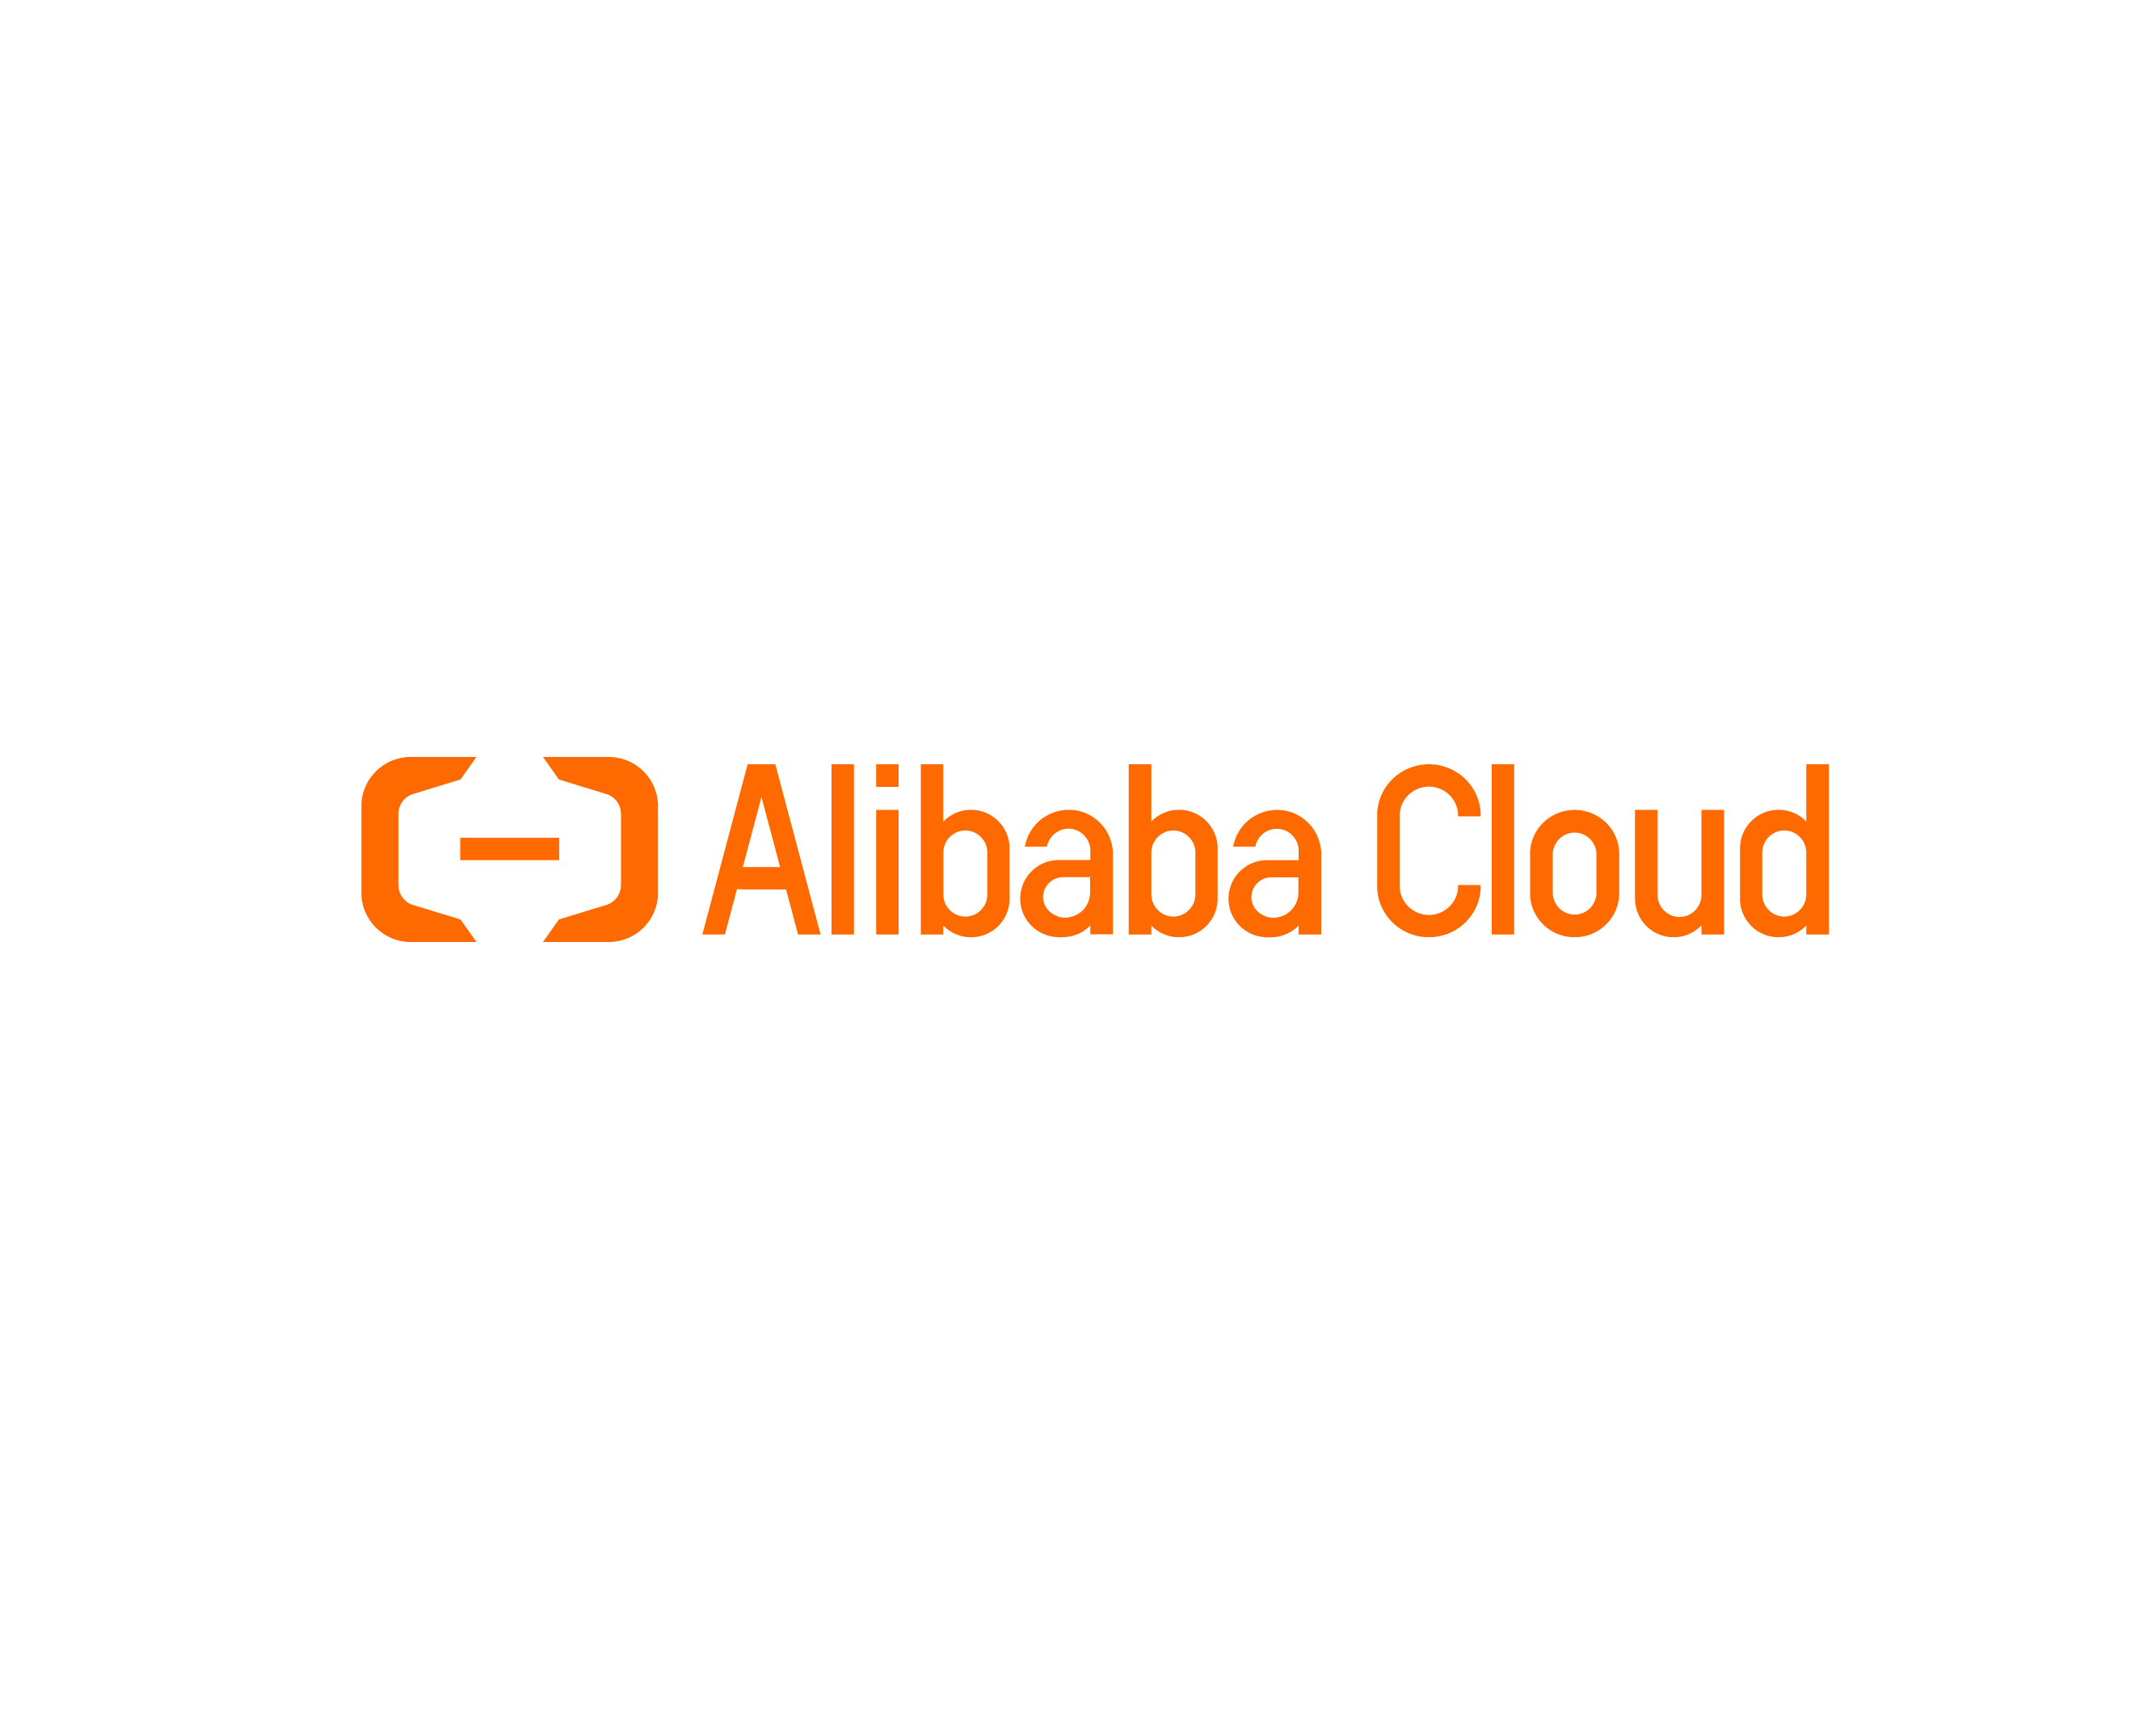 Alibaba Cloud Transparent Logo - Polish your personal project or design ...